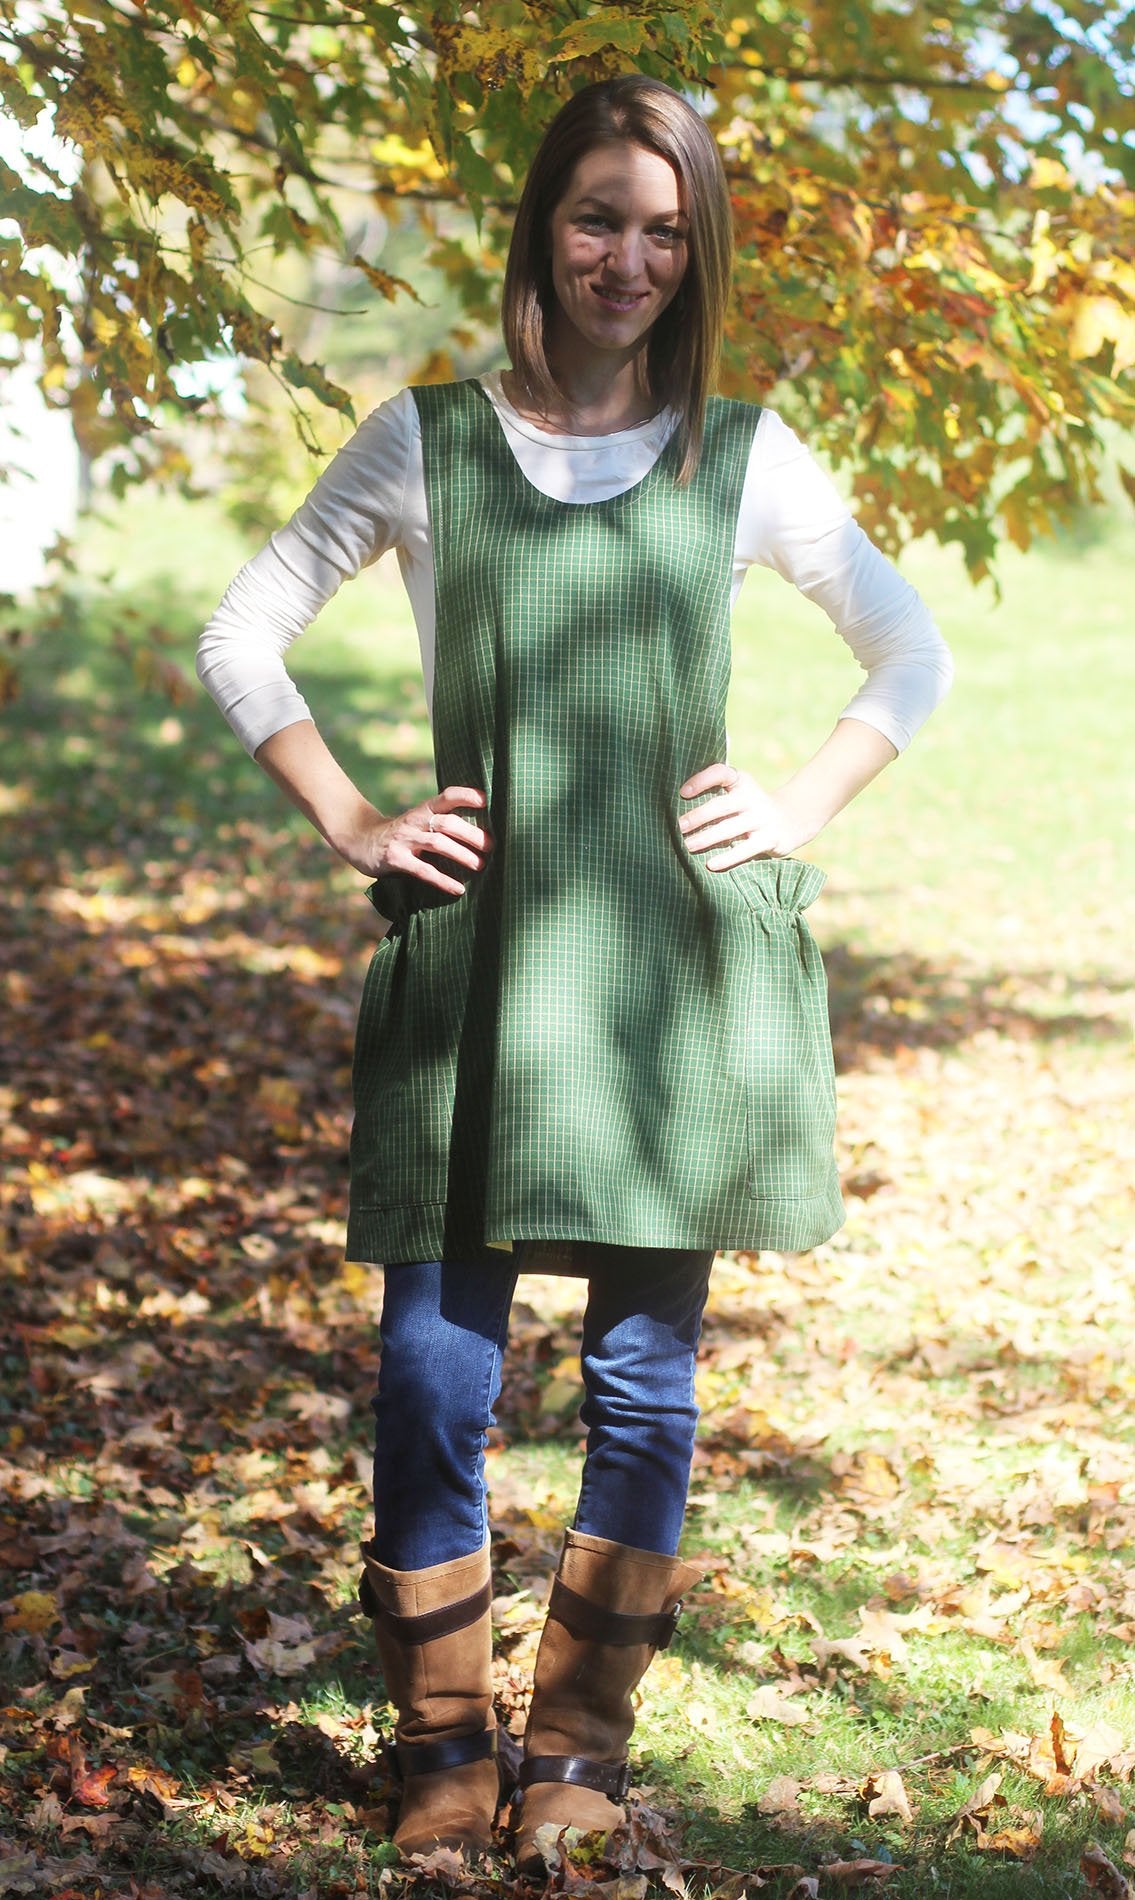 XS-5X No Ties Crossback Apron in 100% Cotton Dark Green Homespun - The Vermont Apron Company - Front View 3